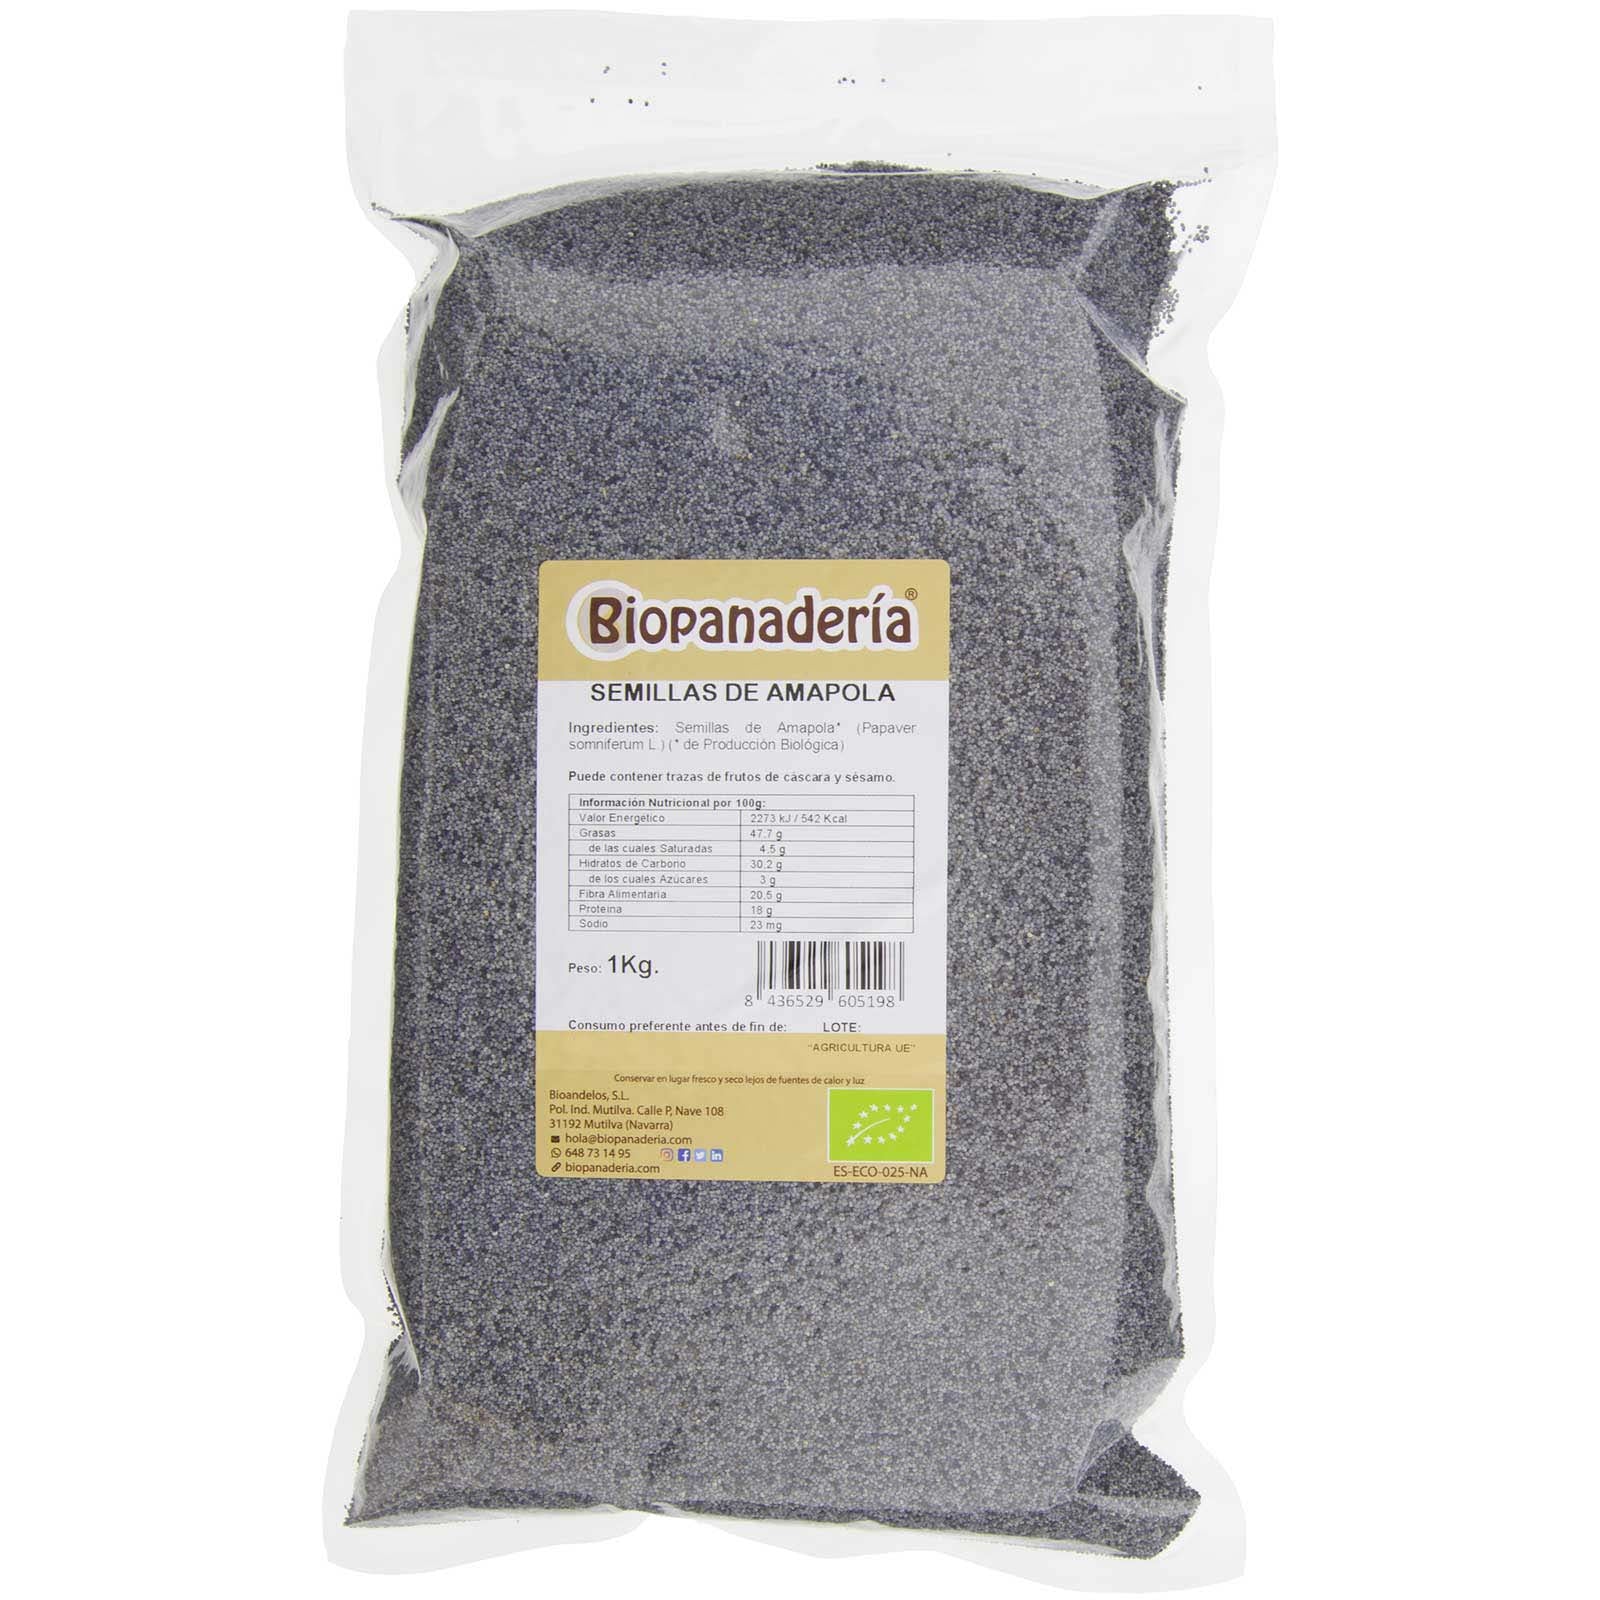 Ecological natural poppy seeds 500g